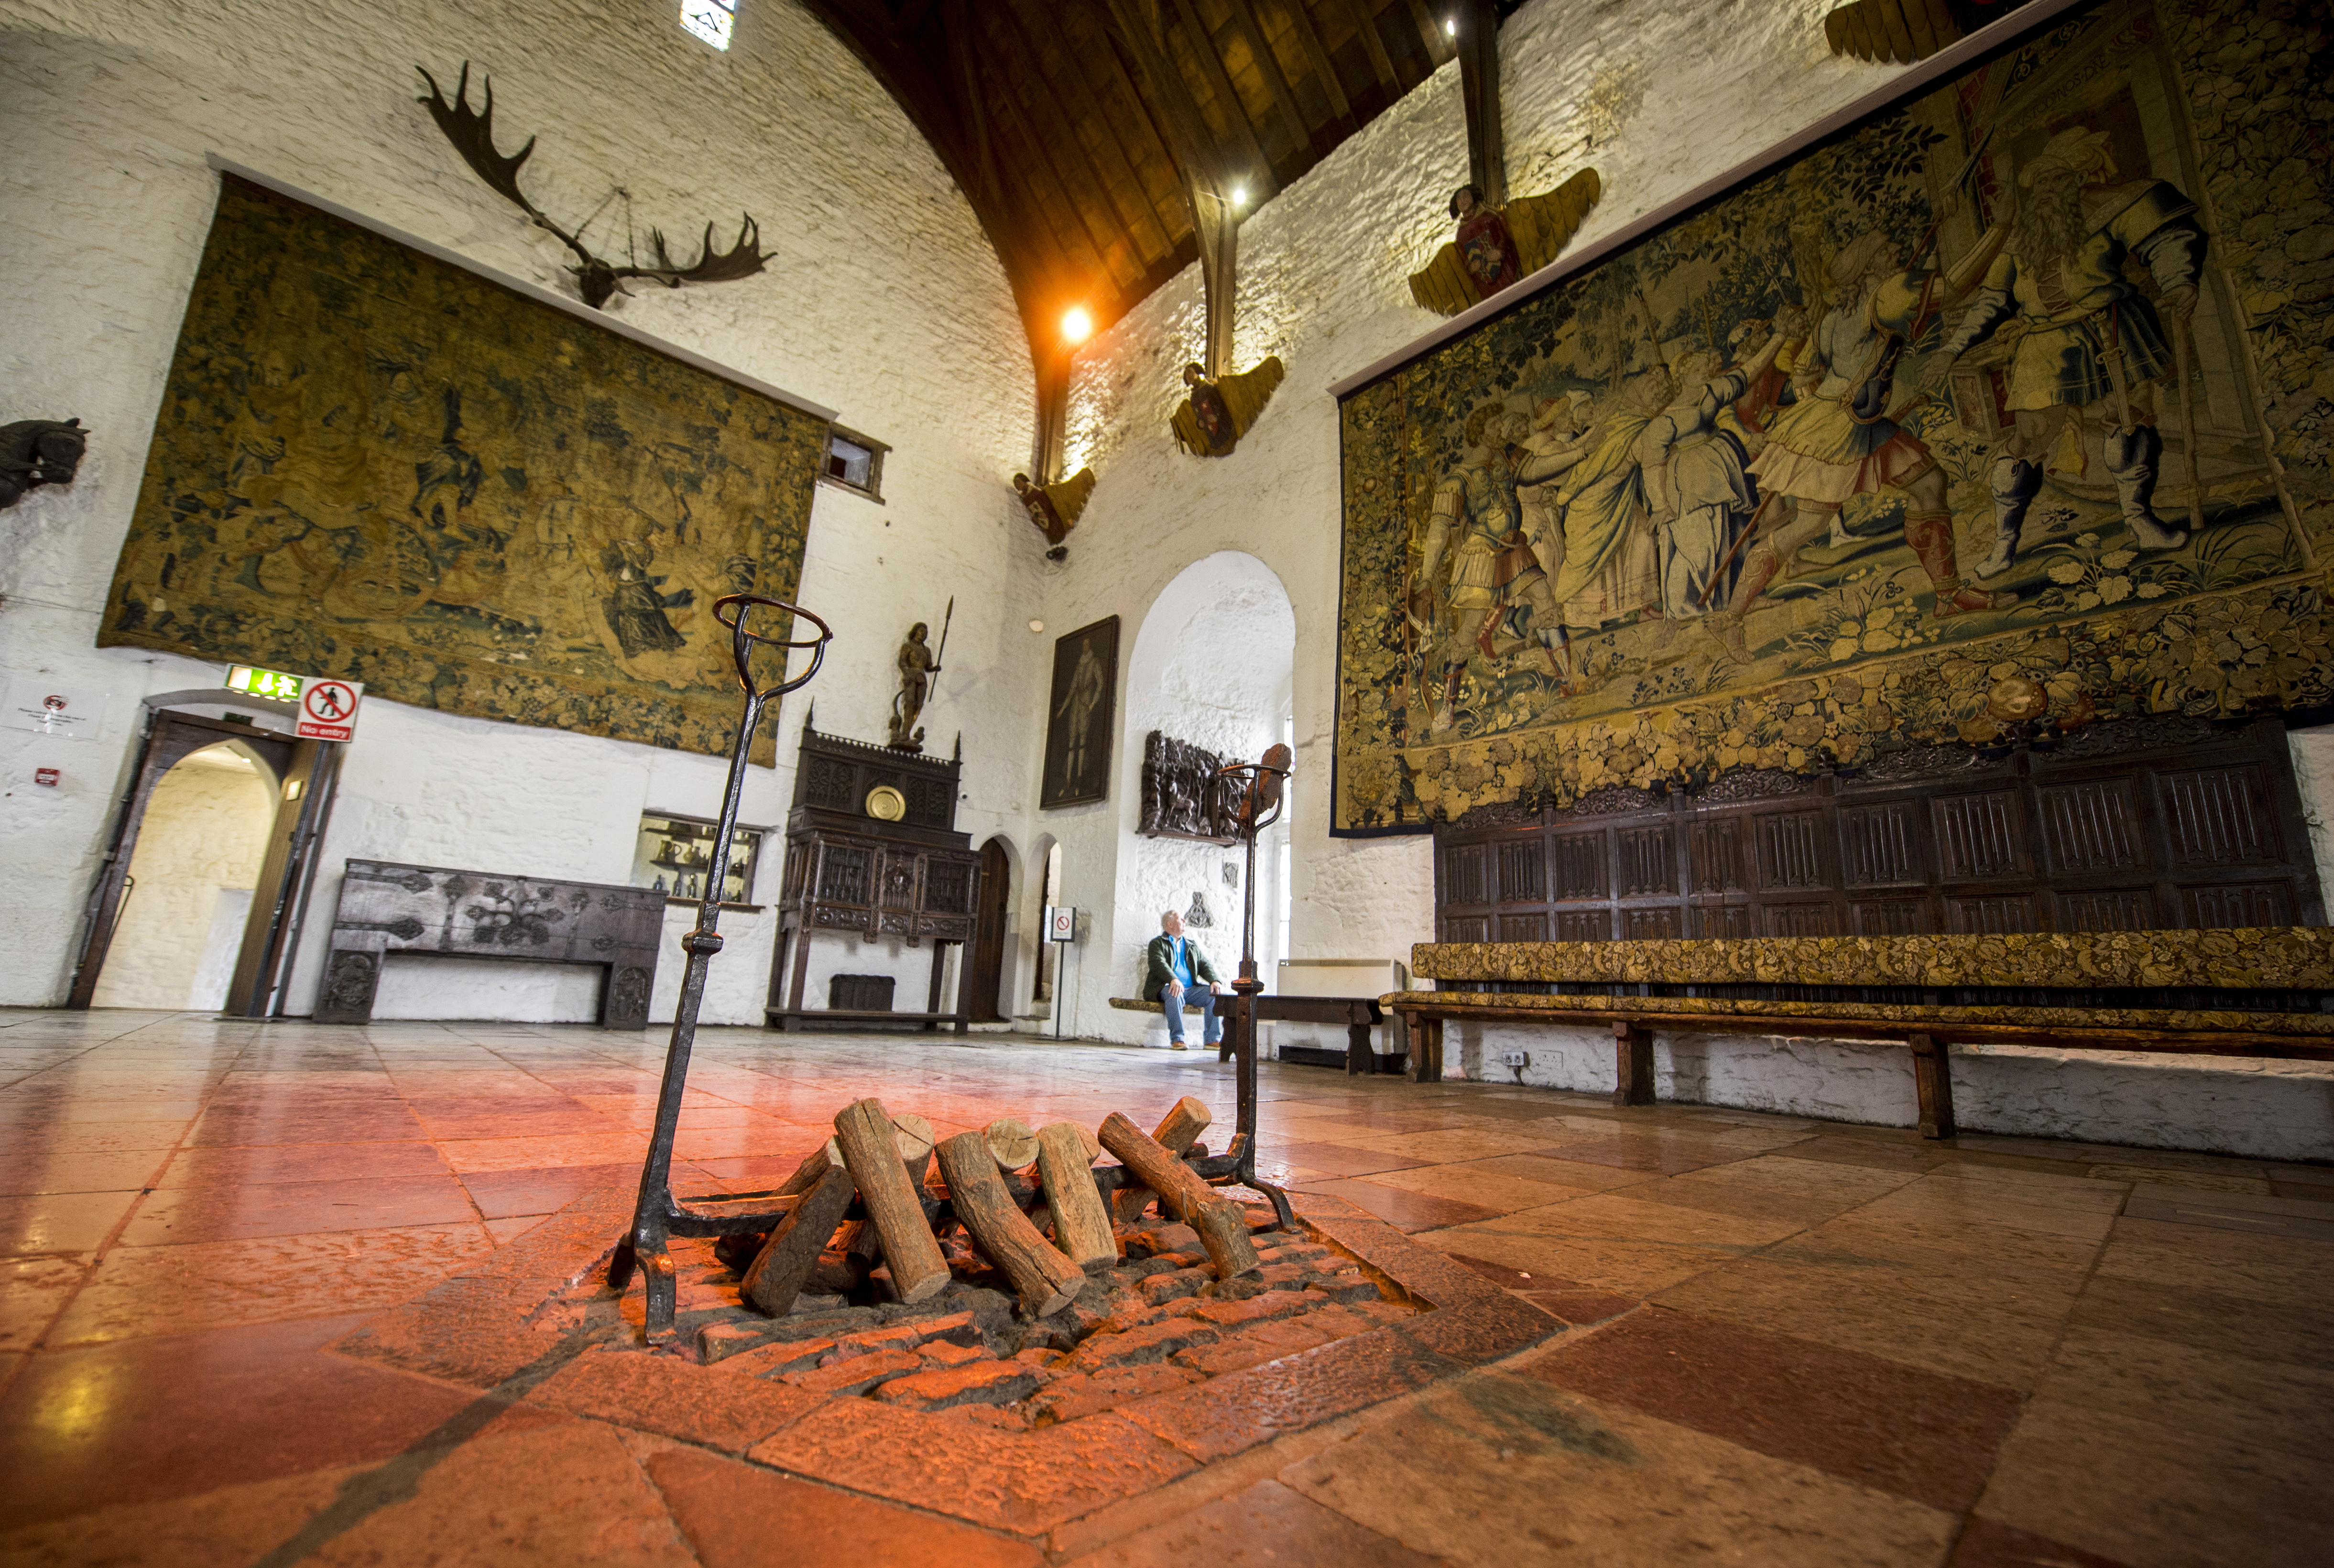 Tapestries that were woven in the Middle Ages, and antlers from extinct elk, hang on the walls of Bunratty Castle.